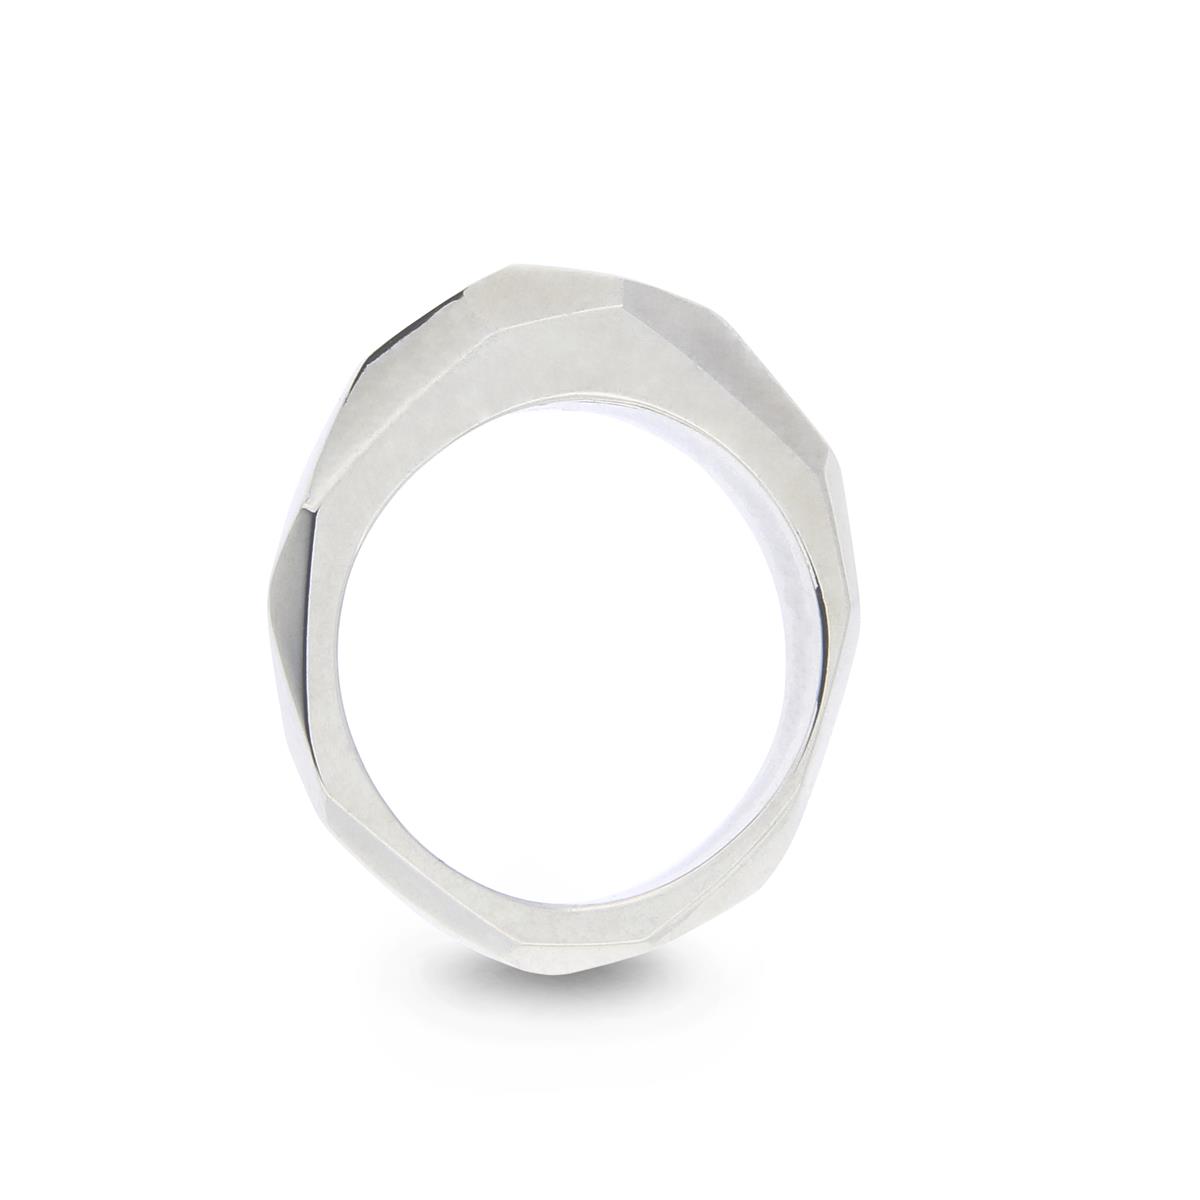 Katie g. Jewellery - Cutting Edge - Abstract Low - Silber poliert - 160€